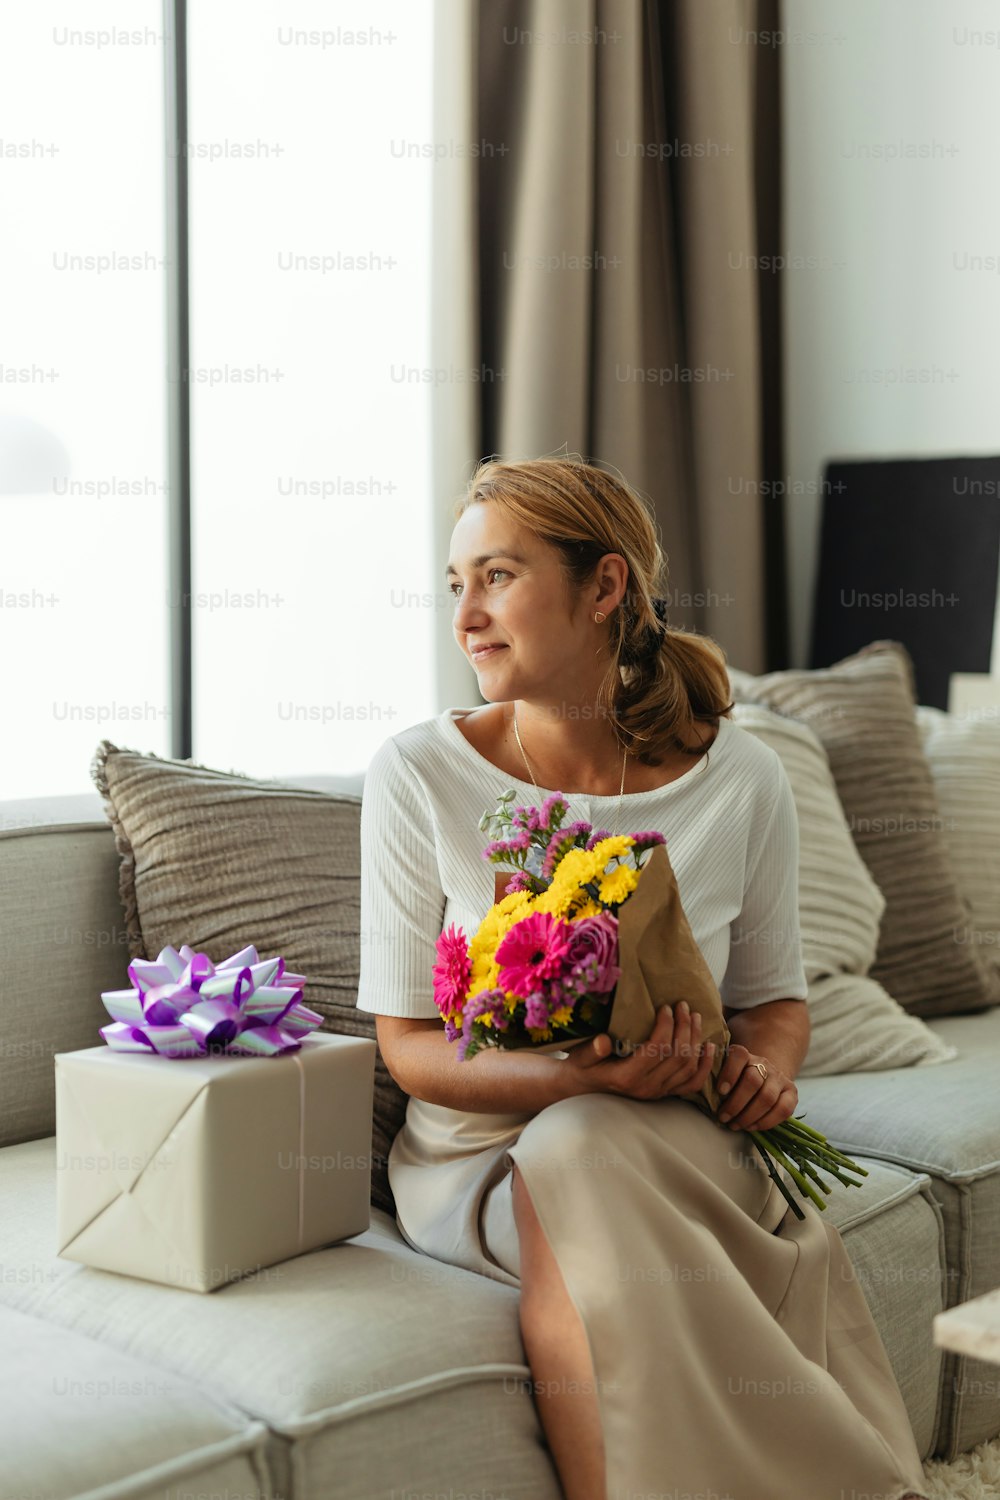 a woman sitting on a couch holding a bouquet of flowers